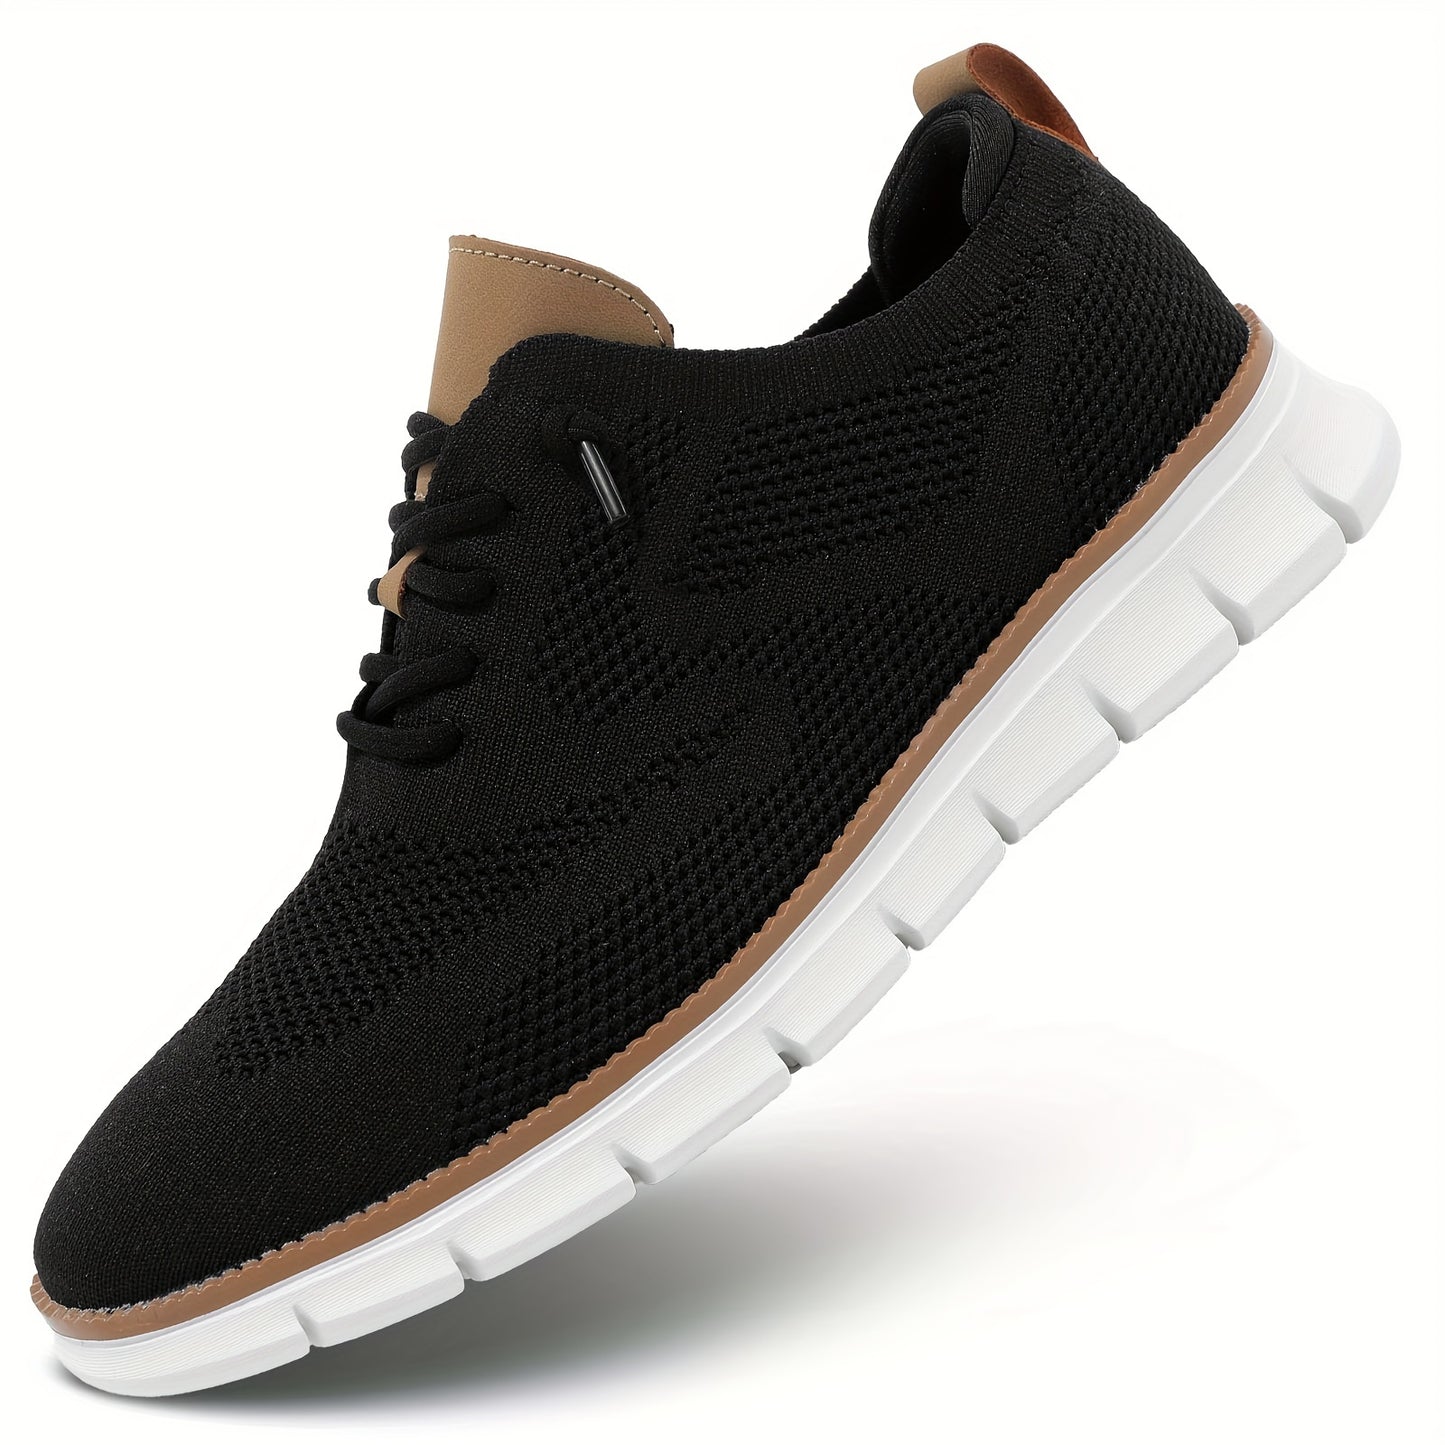 Men's Lace-up Sneakers - Athletic Shoes - Lightweight And Breathable